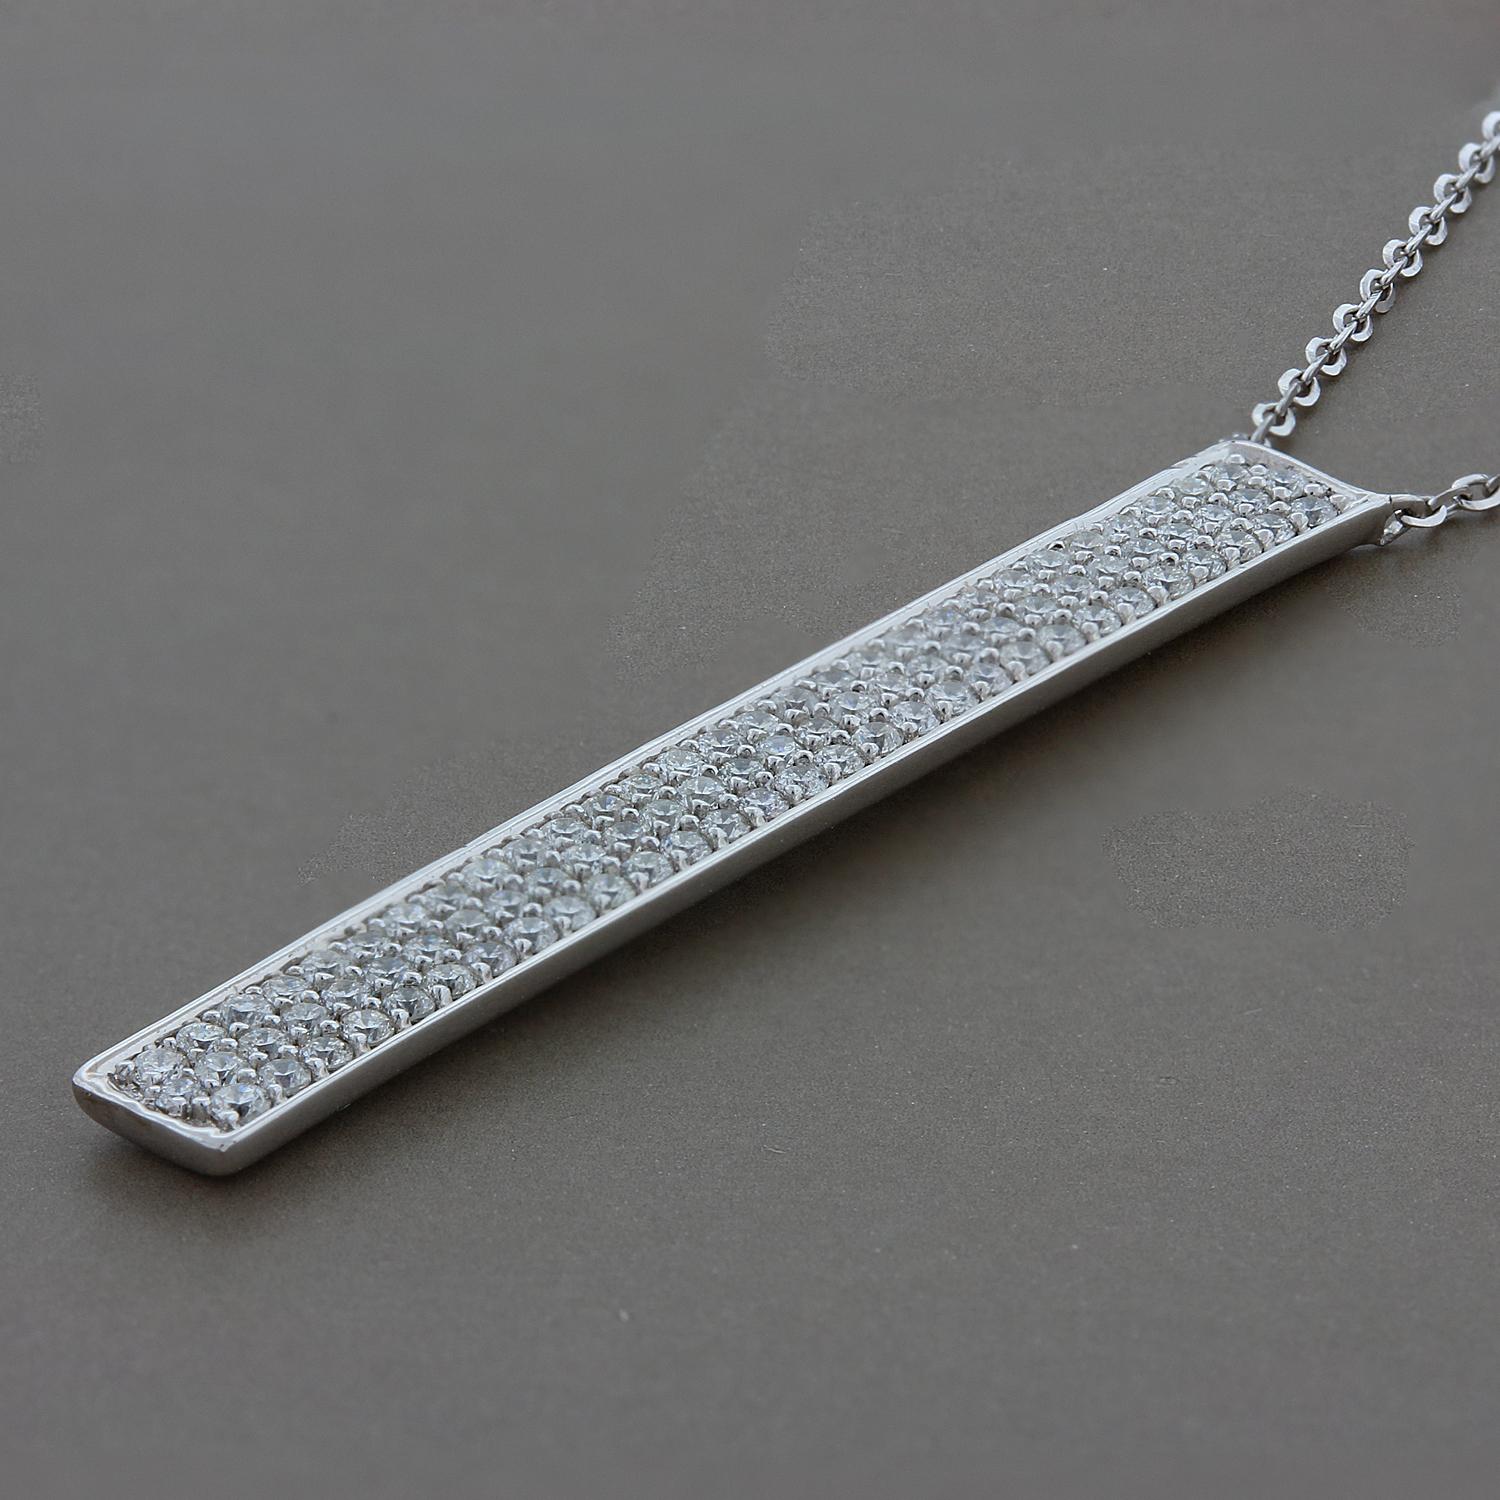 A contemporary everyday necklace featuring 0.54 carats of round cut diamonds studded on a vertical bar drop. Set in 14K white gold.

Chain Length: 18 inches with adjustable loops at 16 inches and 17 inches 

Bar Length: 1 7/16 inches

Bar Width: